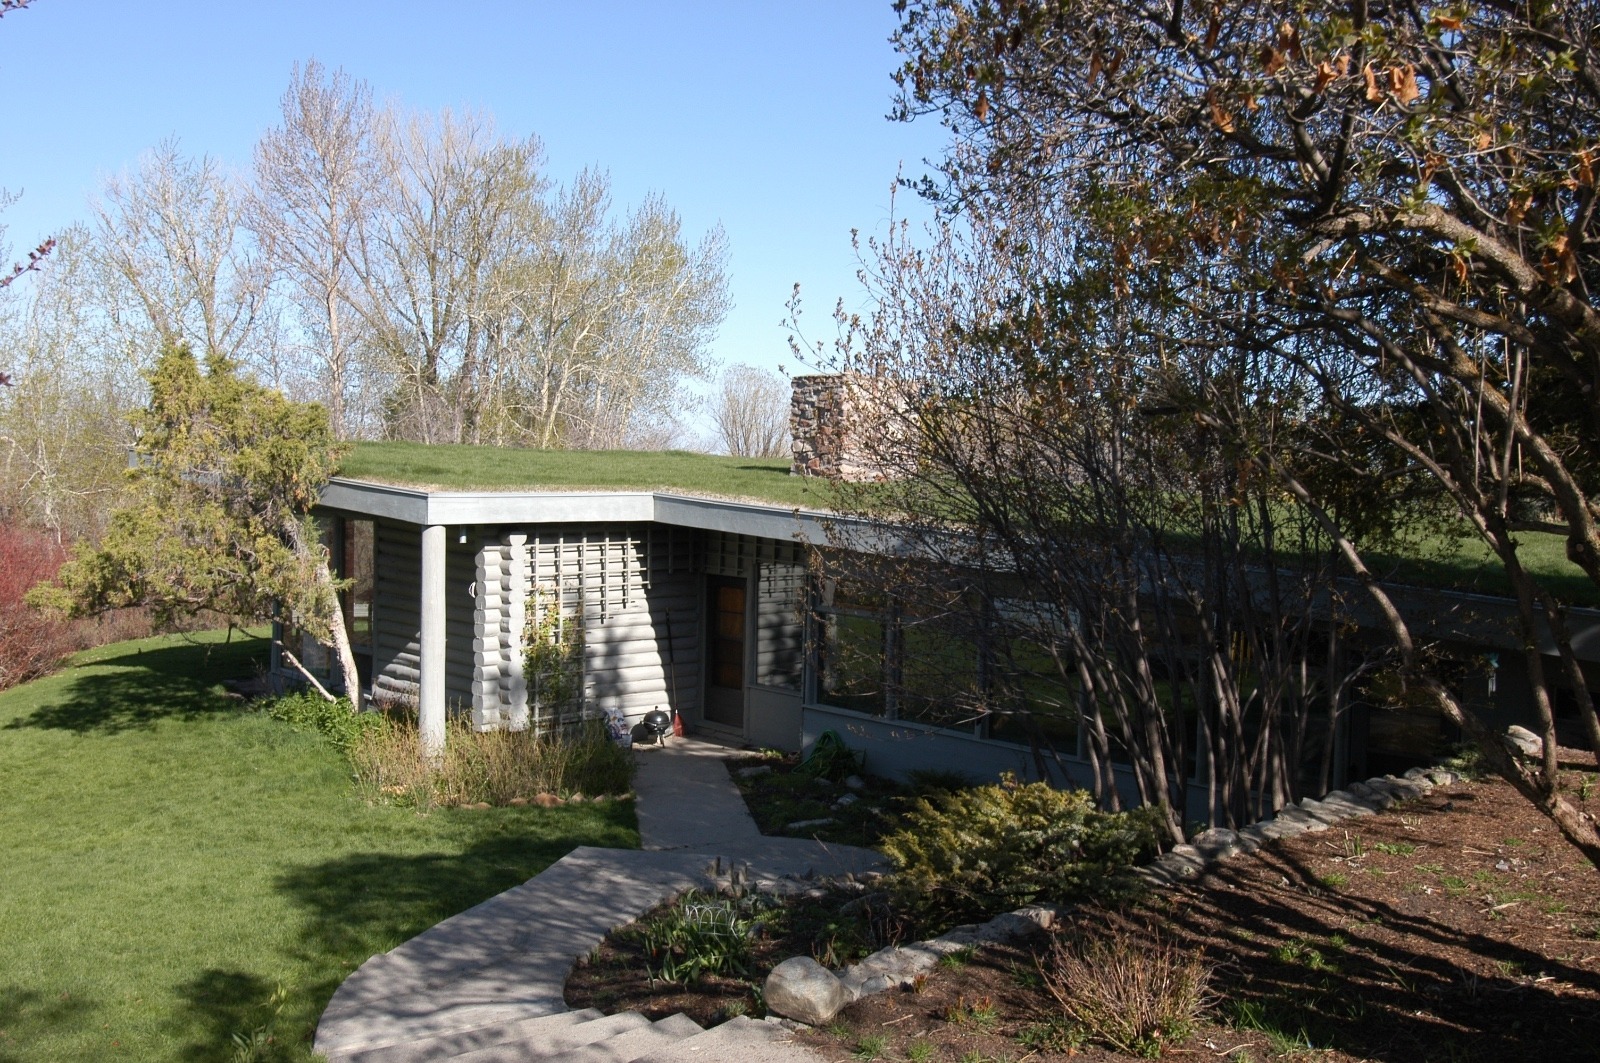 Besides concealment, low-slung sod-roof homes give occupants a more intimate connection to the earth and the grass absorbs heat, one small tool in addressing climate change. Photo by Joe Valerio